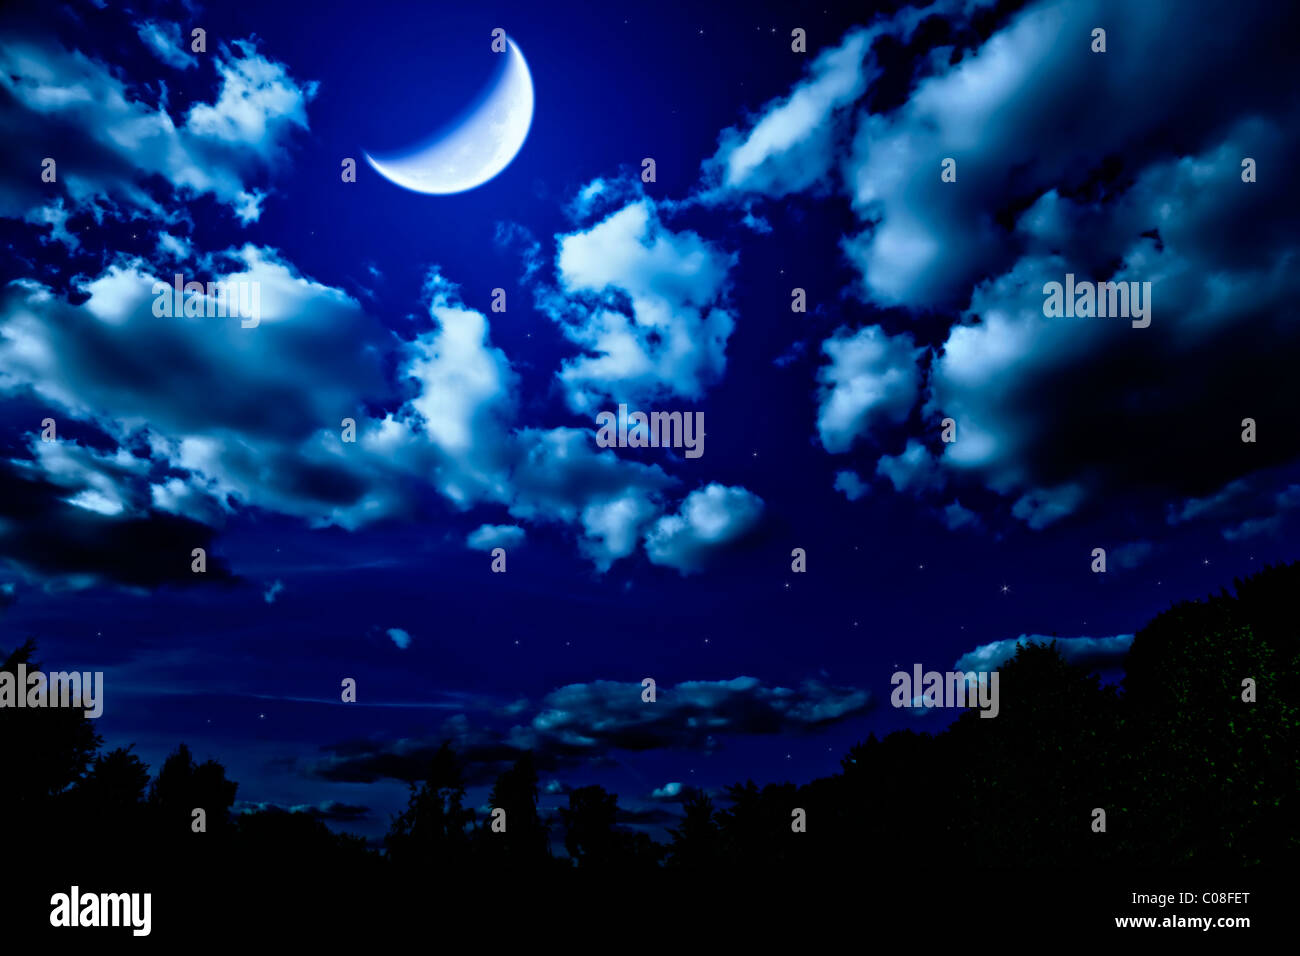 Landscape with night summer forest with green trees and bright large moon in dark sky with clouds and stars Stock Photo